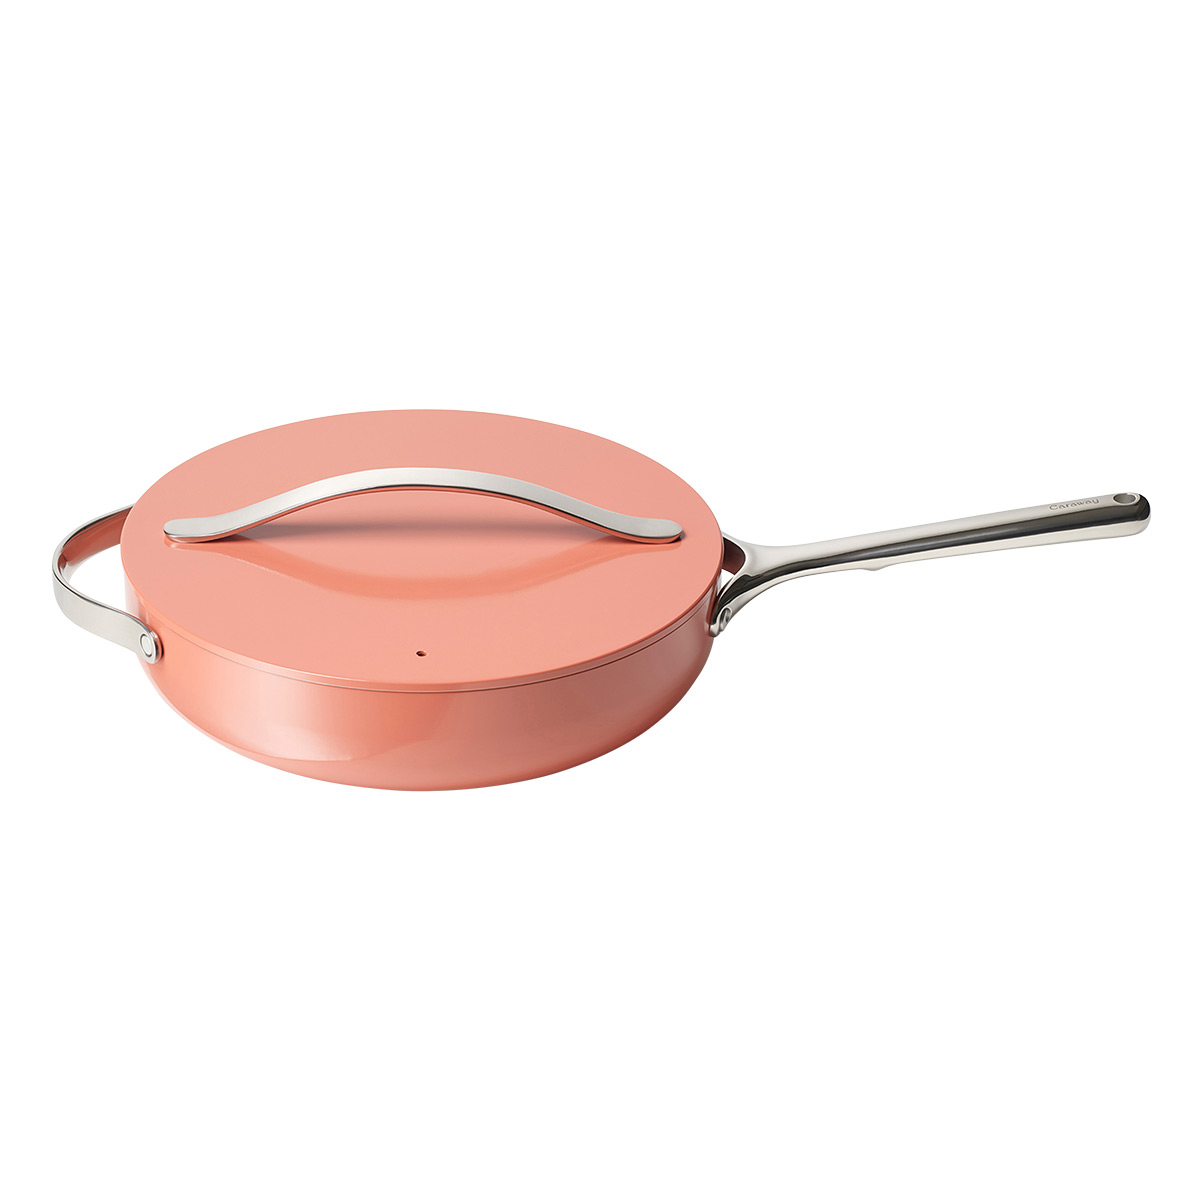 Caraway, Food & Wine: The 8 Best Non-Toxic Cookware Buys for Home Cooks,  According to Customers - Springdale Ventures